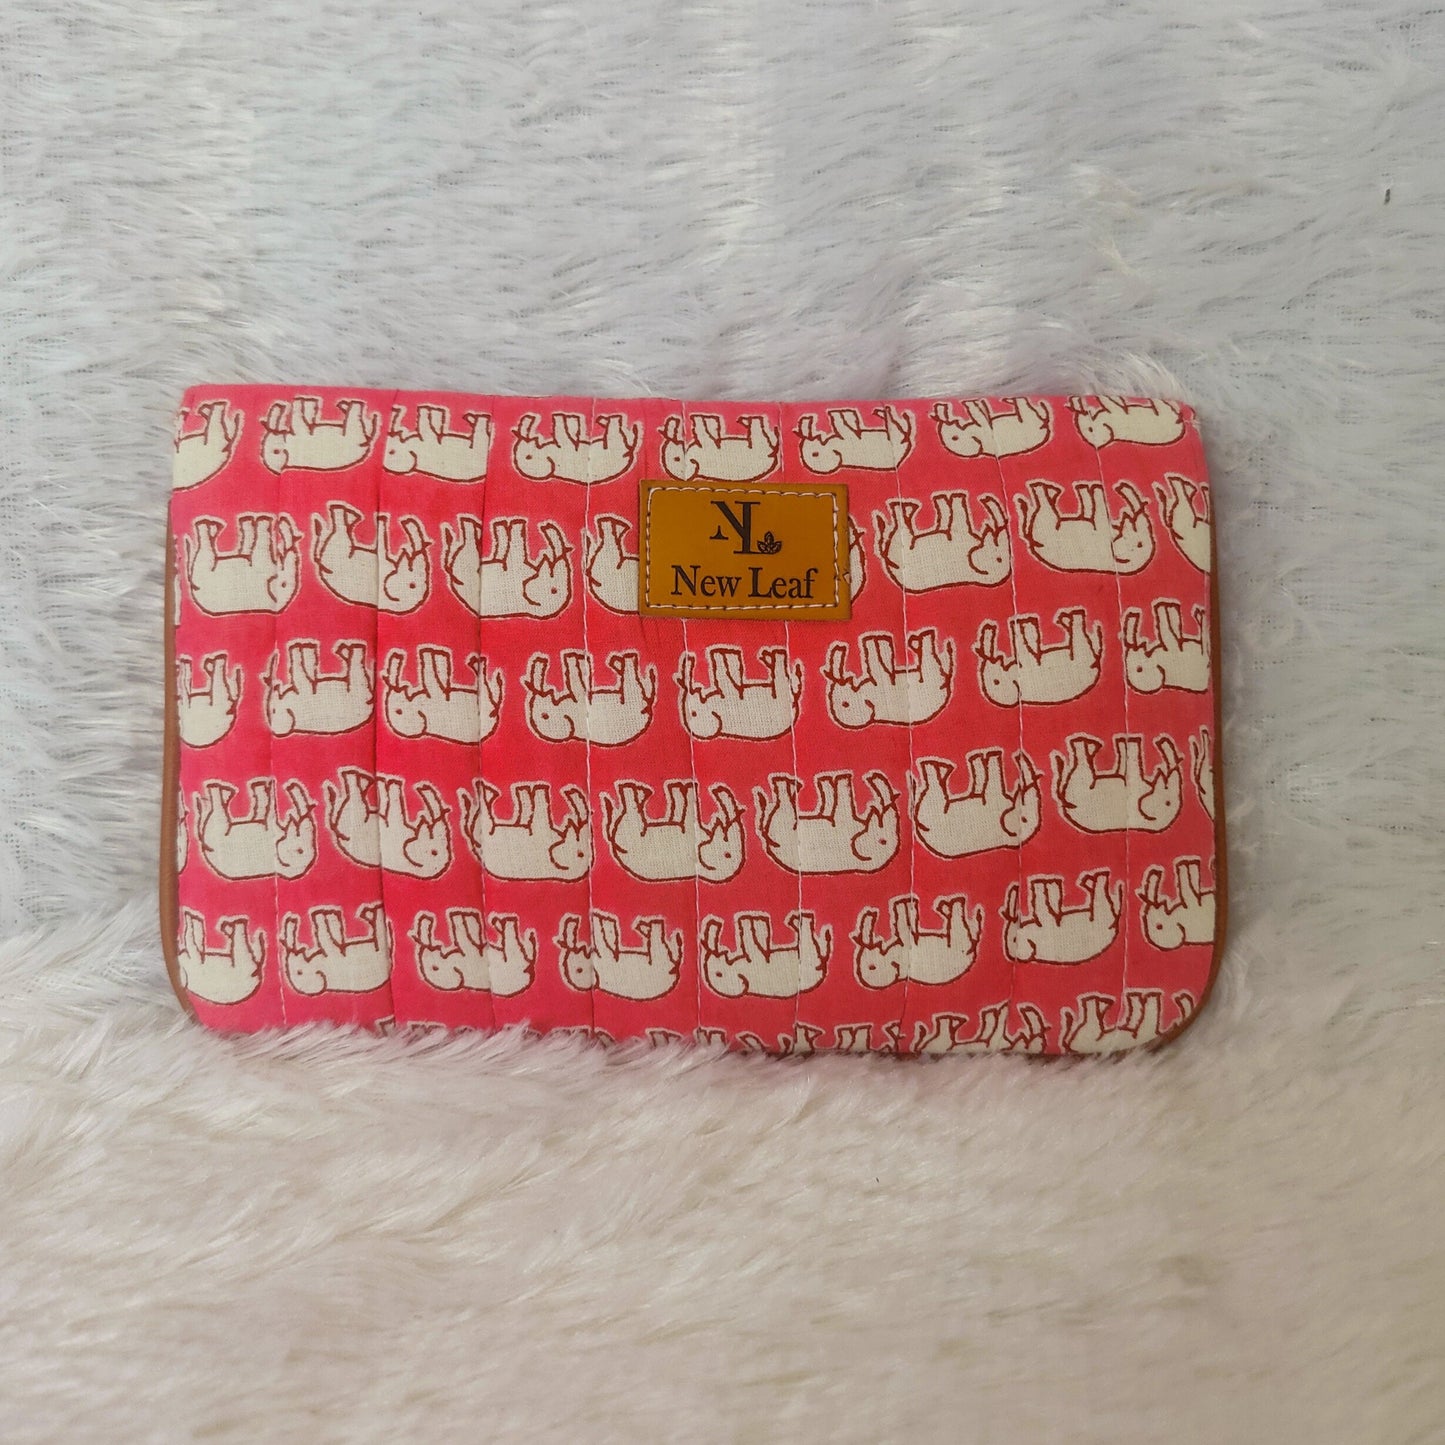 Quirky Handcrafted Pouch